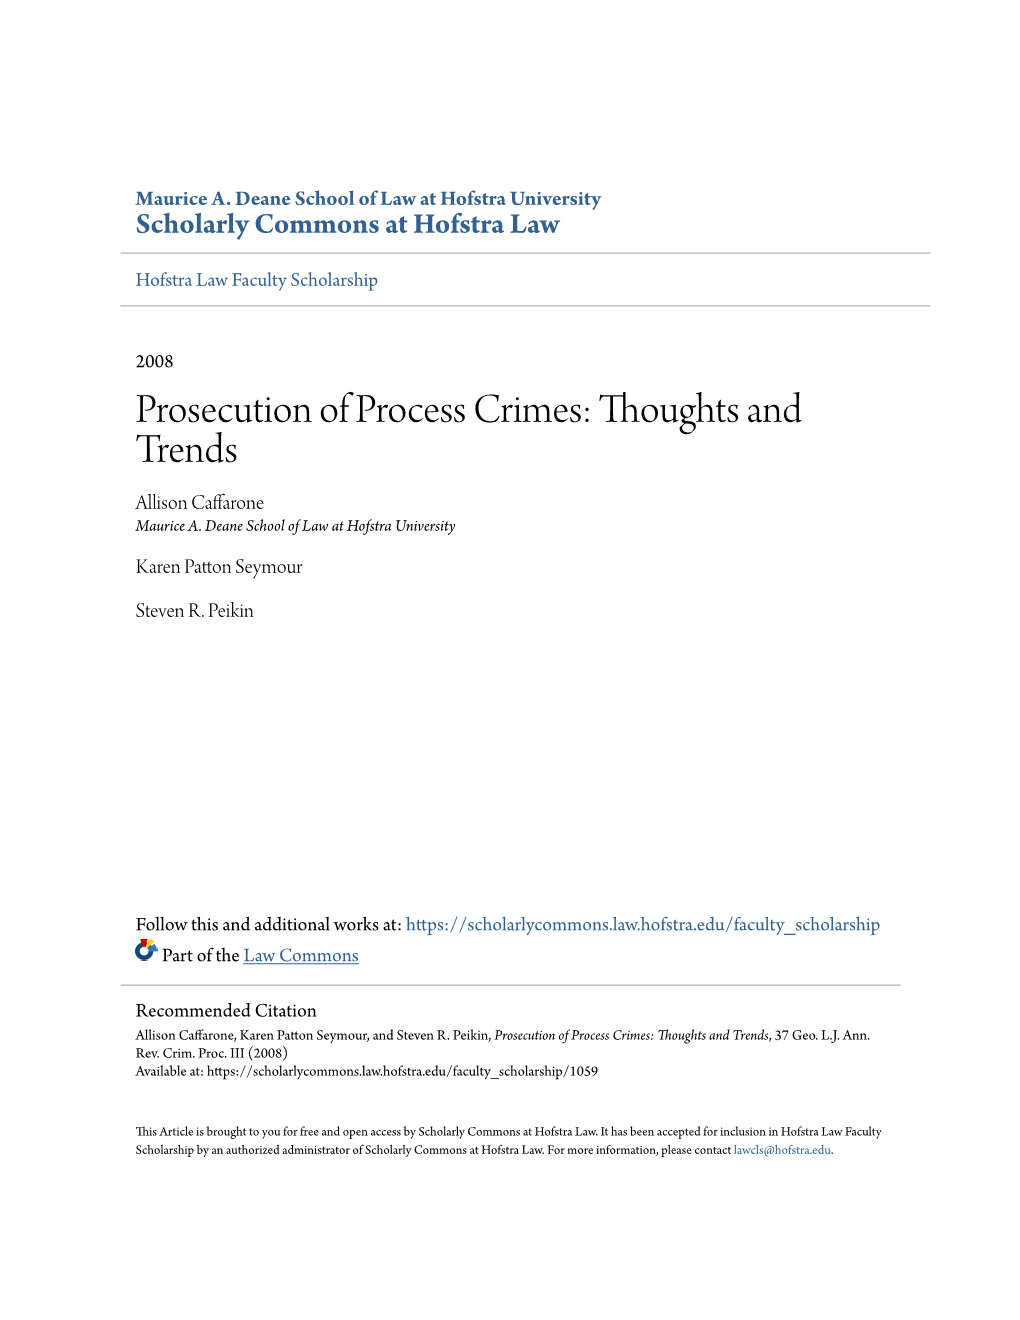 Prosecution of Process Crimes: Thoughts and Trends Allison Caffarone Maurice A